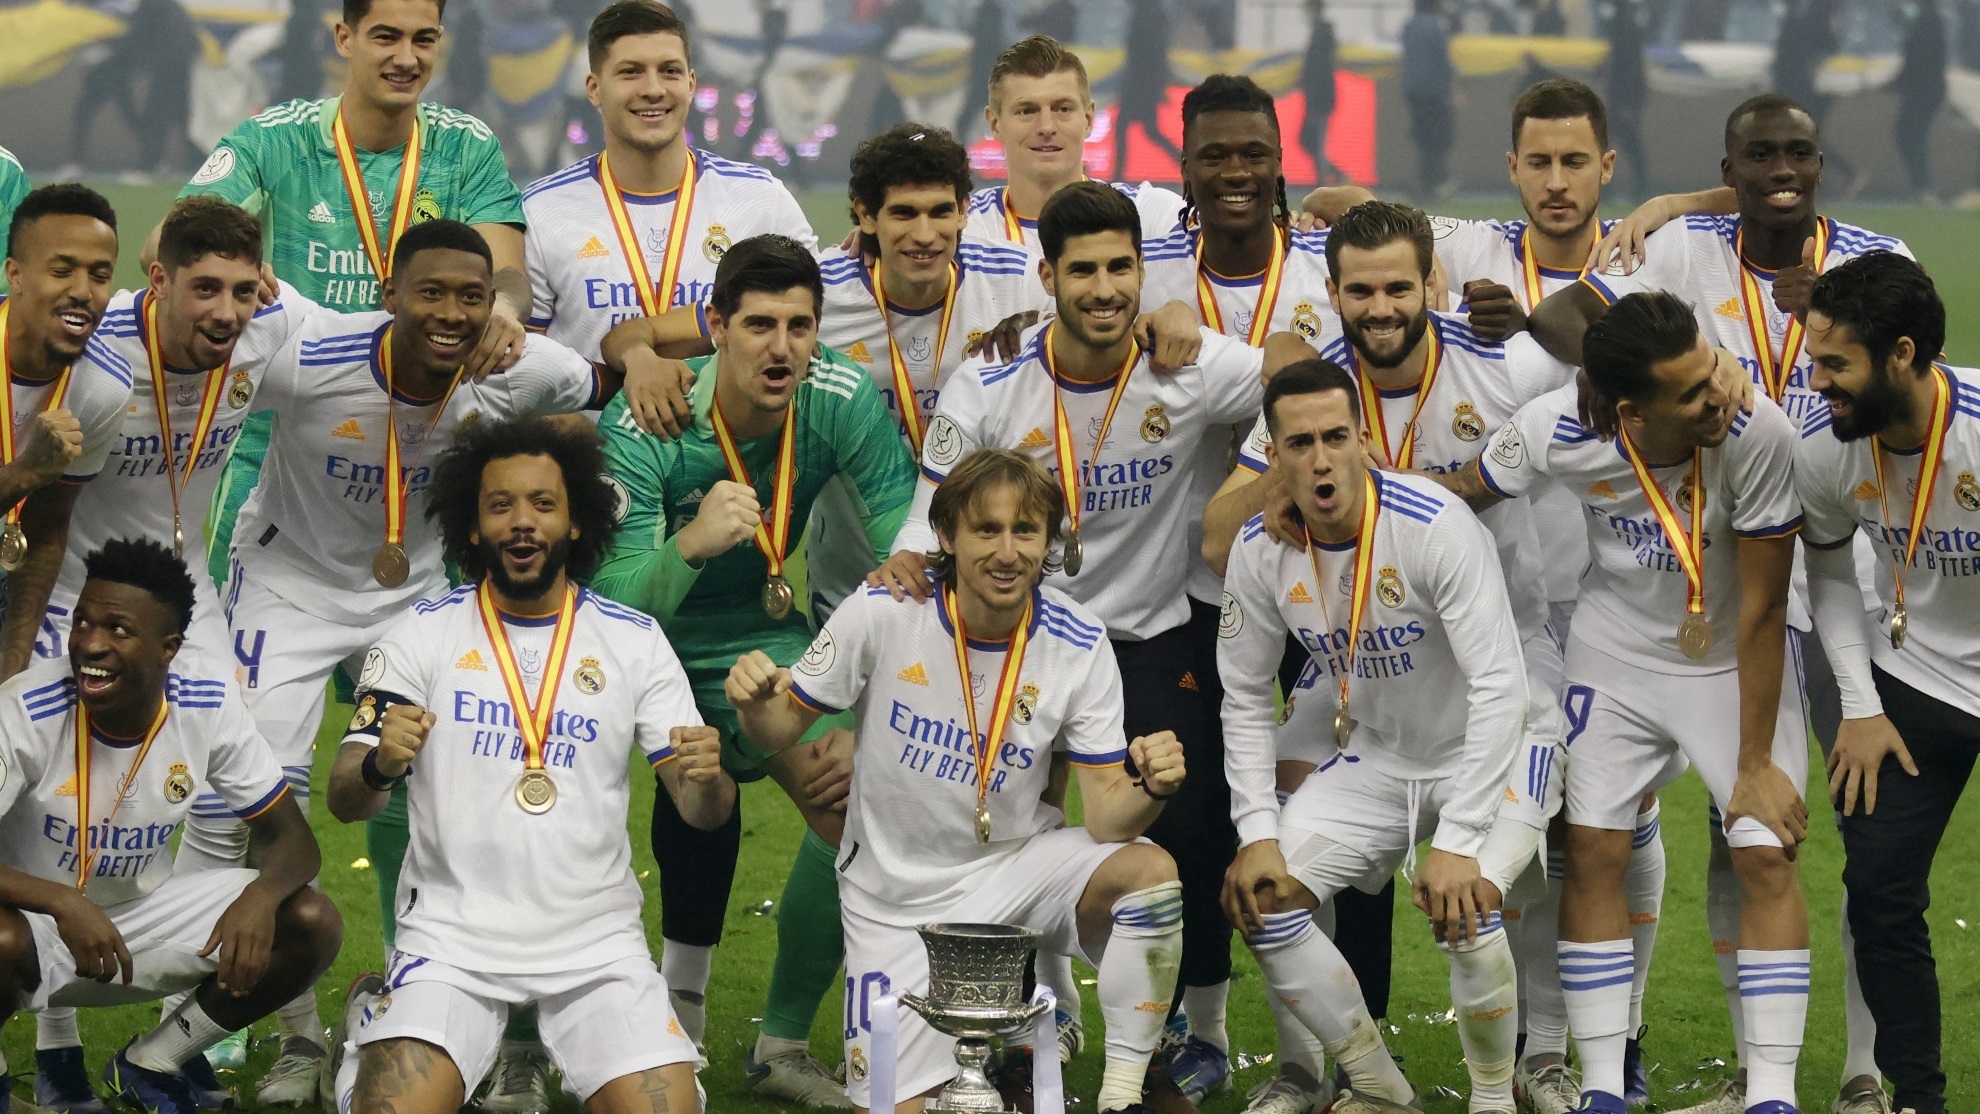 The Real Madrid players pose with the Supercopa de Espana trophy.